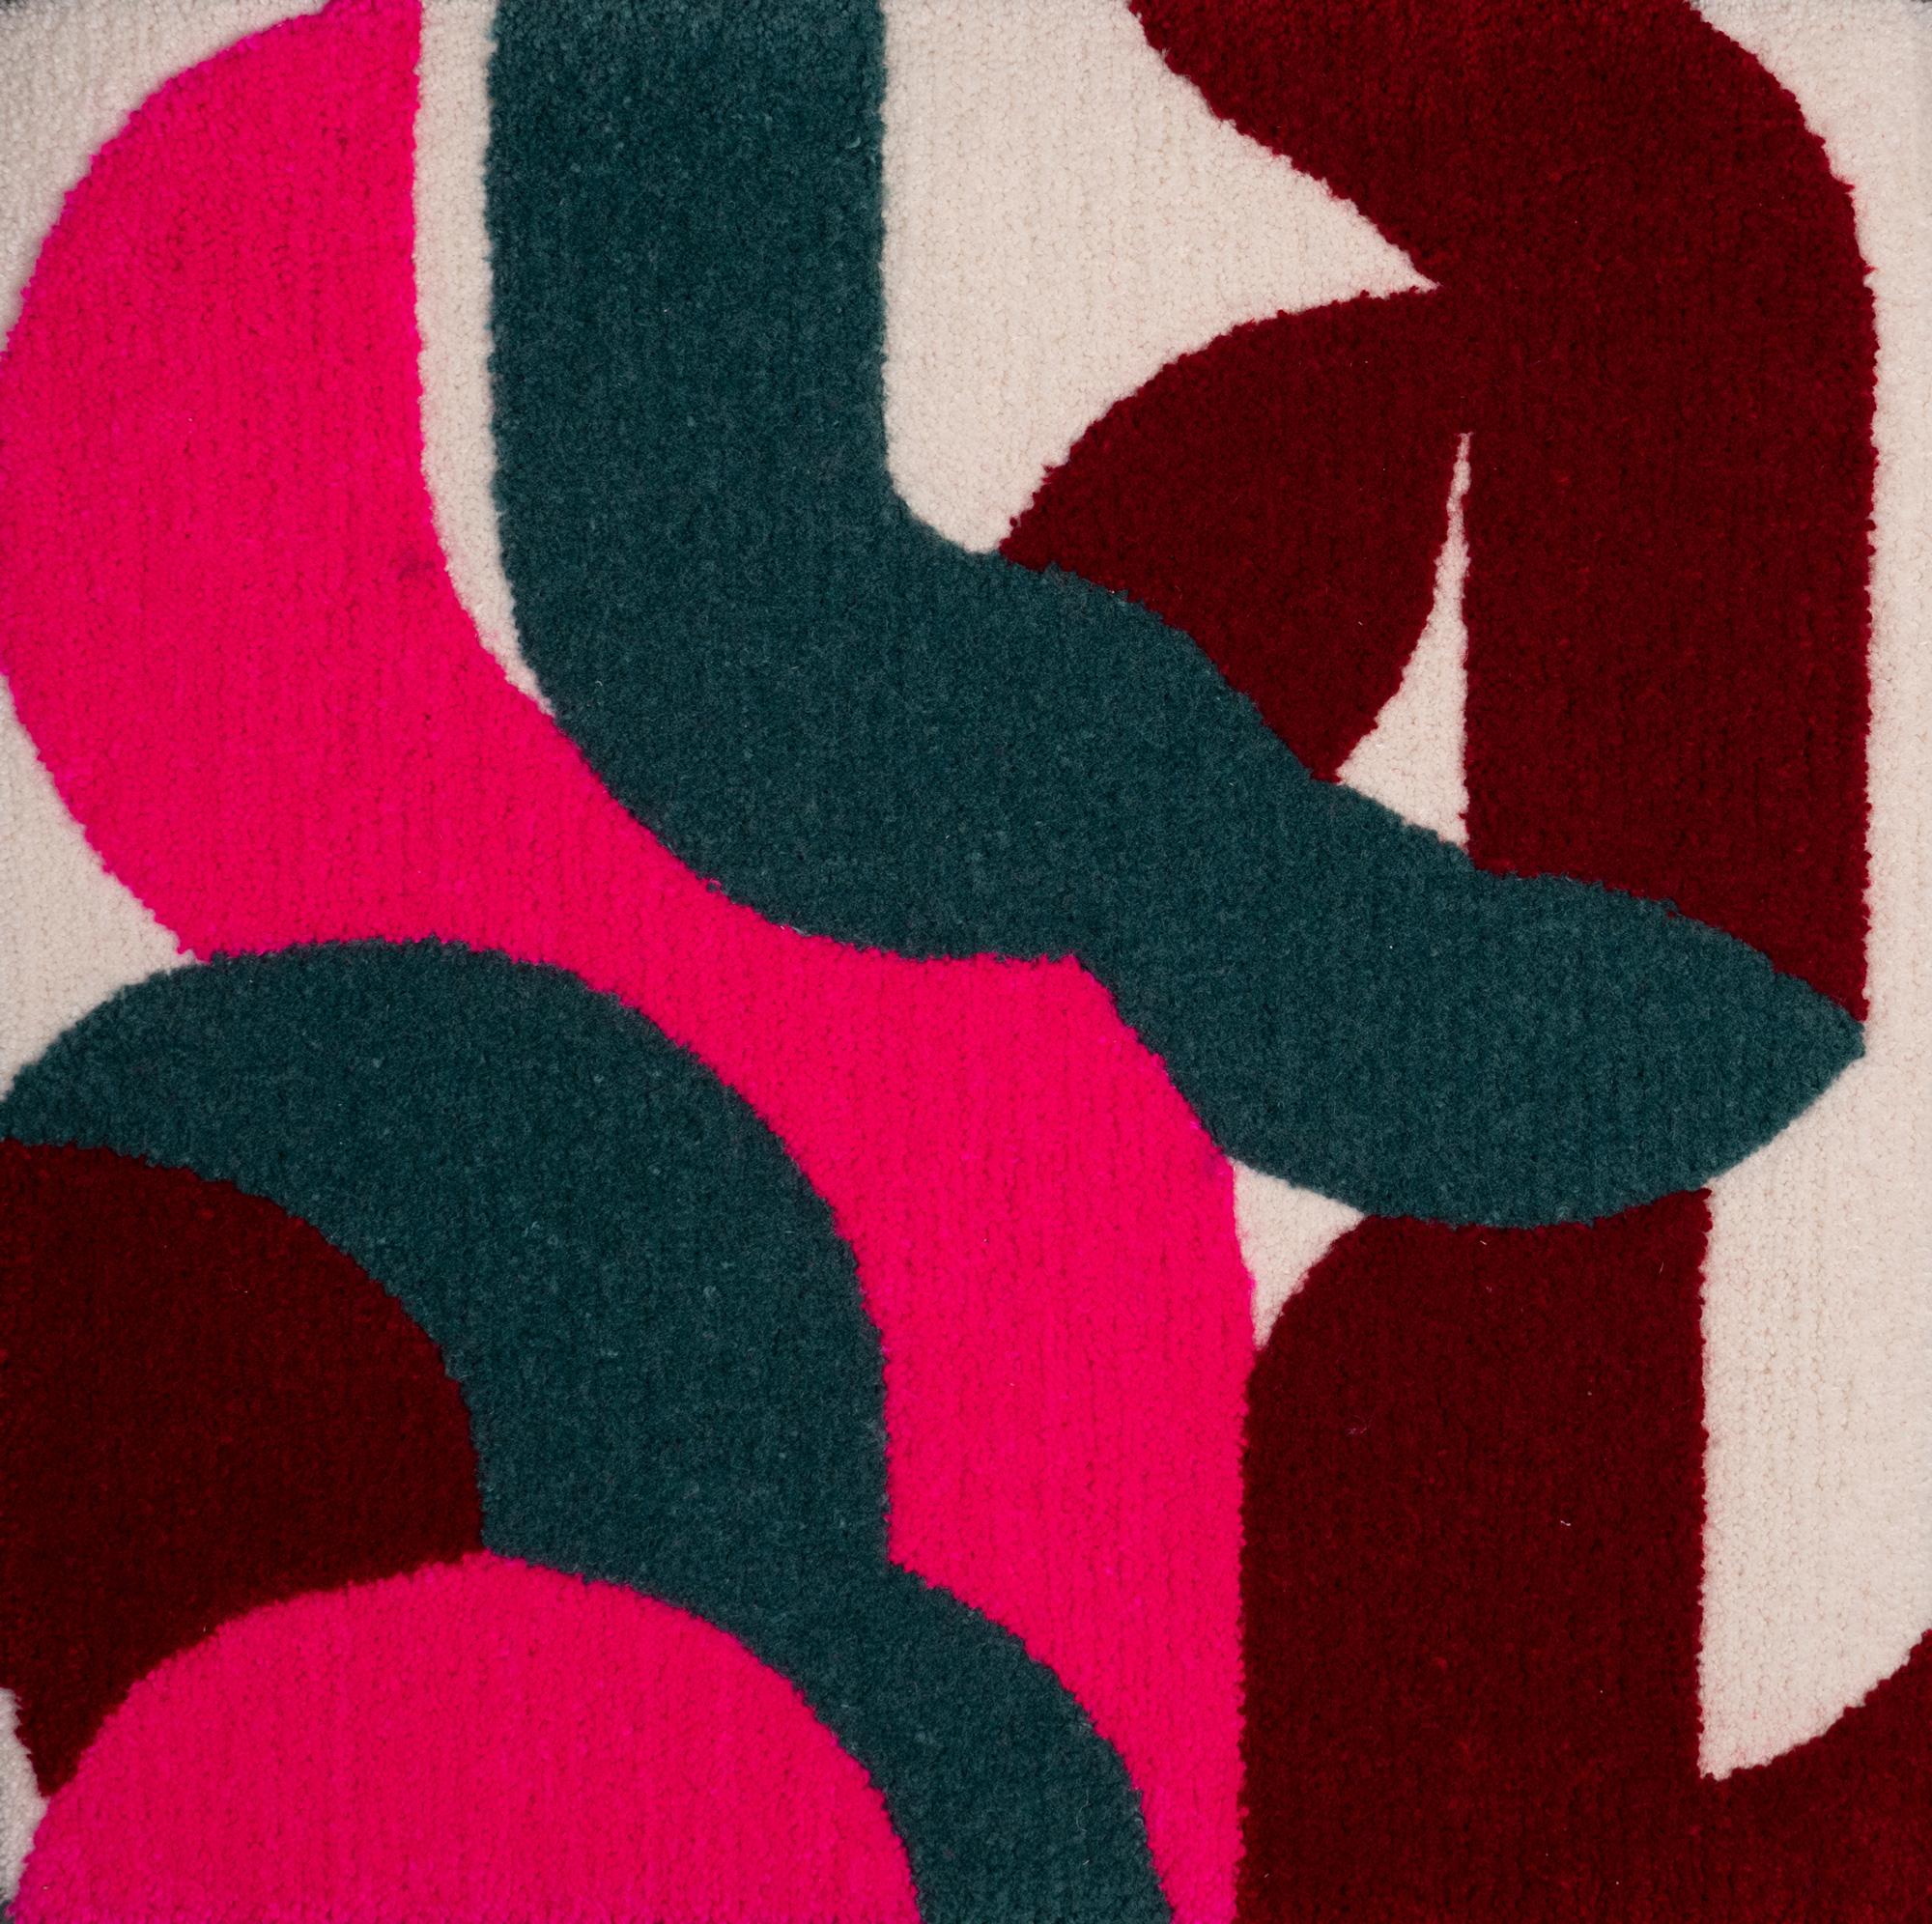 This abstract design rug is a piece currently in production as part of Tuft the World's debut TTW Editions collection. This piece is tufted and crafted in the Tuft the World workshop in the United States with 100% New Zealand wool, featuring designs